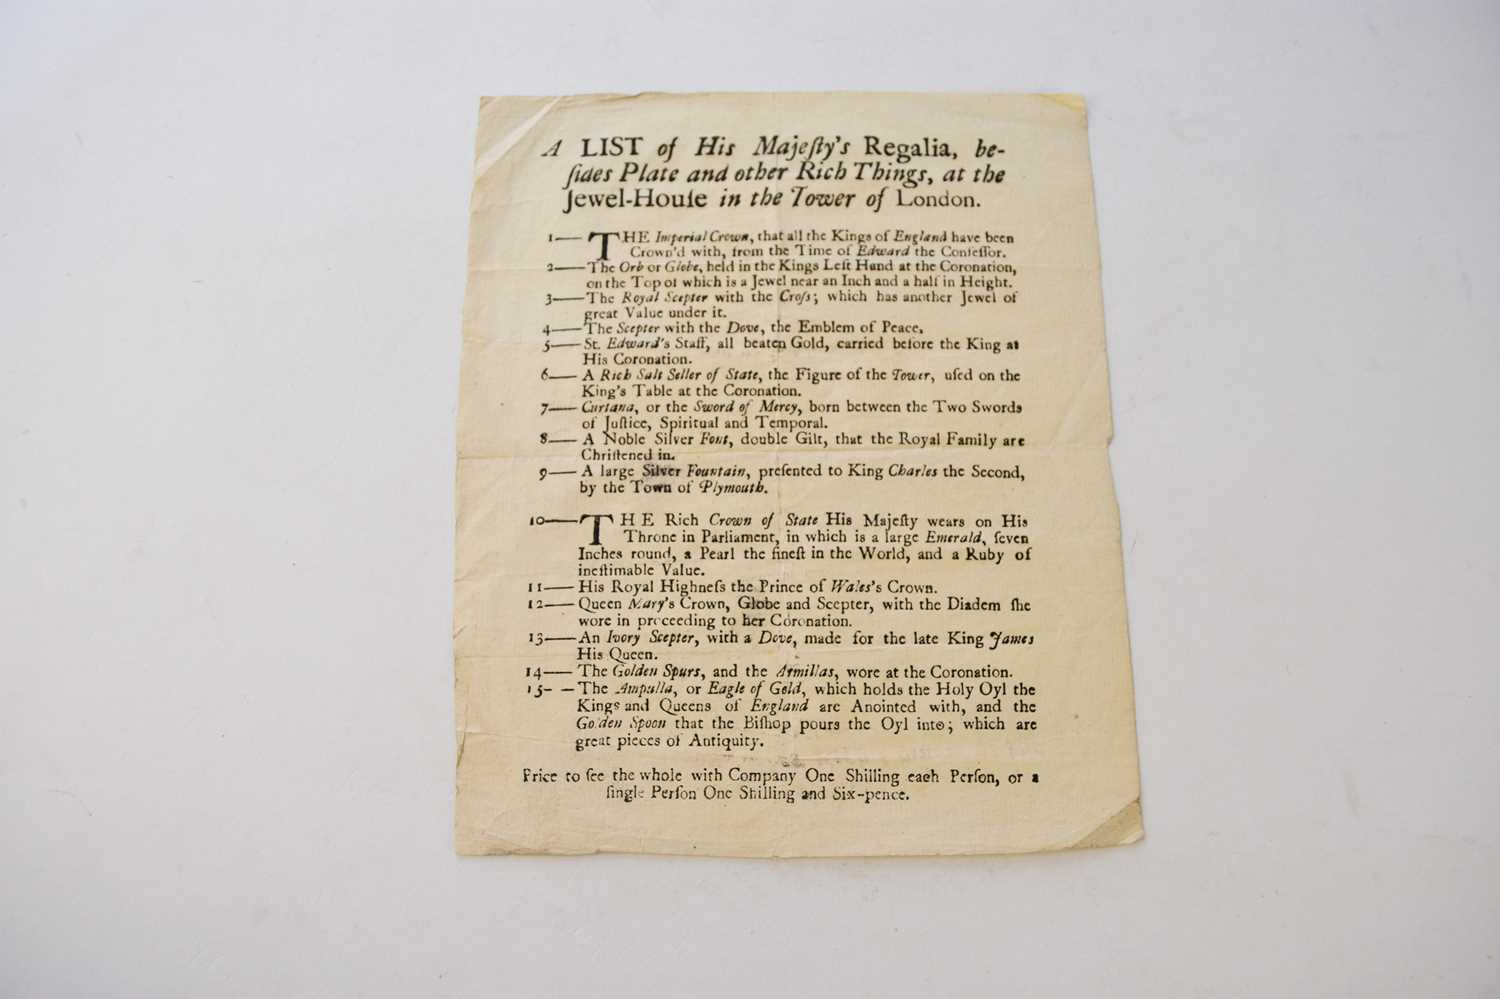 Lot 1061 - BROADSIDE, HIS MAJESTY'S REGALIA. A list of His Majesty's Regalia, Bedsides Plate and other Rich Things, at the Jewel-House in the Tower of London.